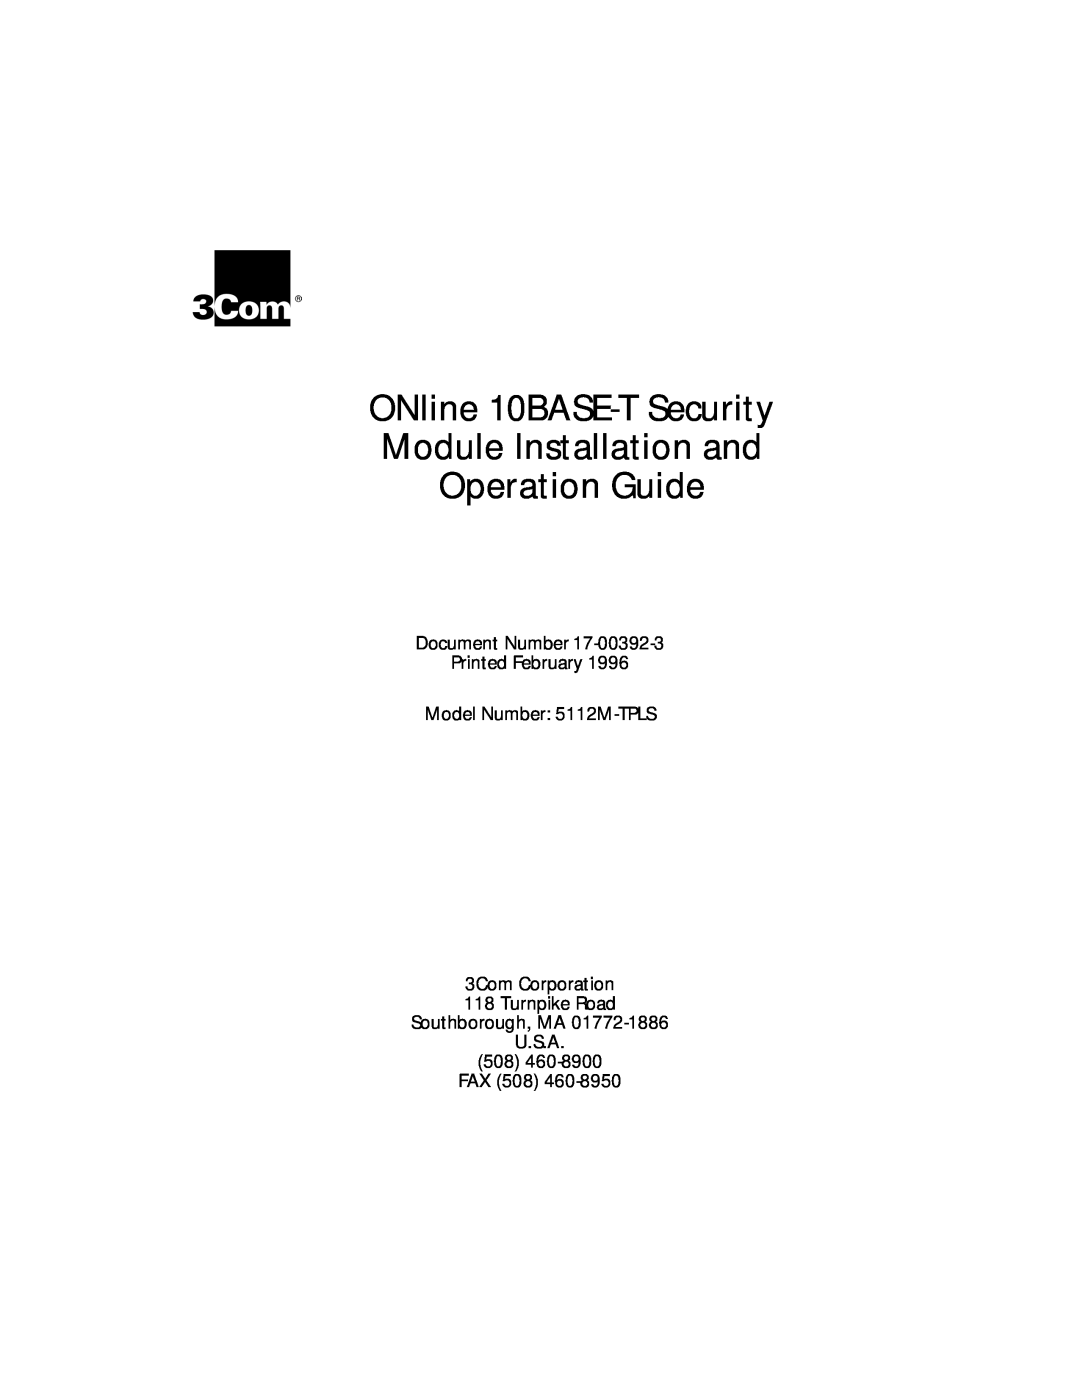 3Com 5112M-TPLS installation and operation guide ONline 10BASE-T Security Module Installation and Operation Guide 